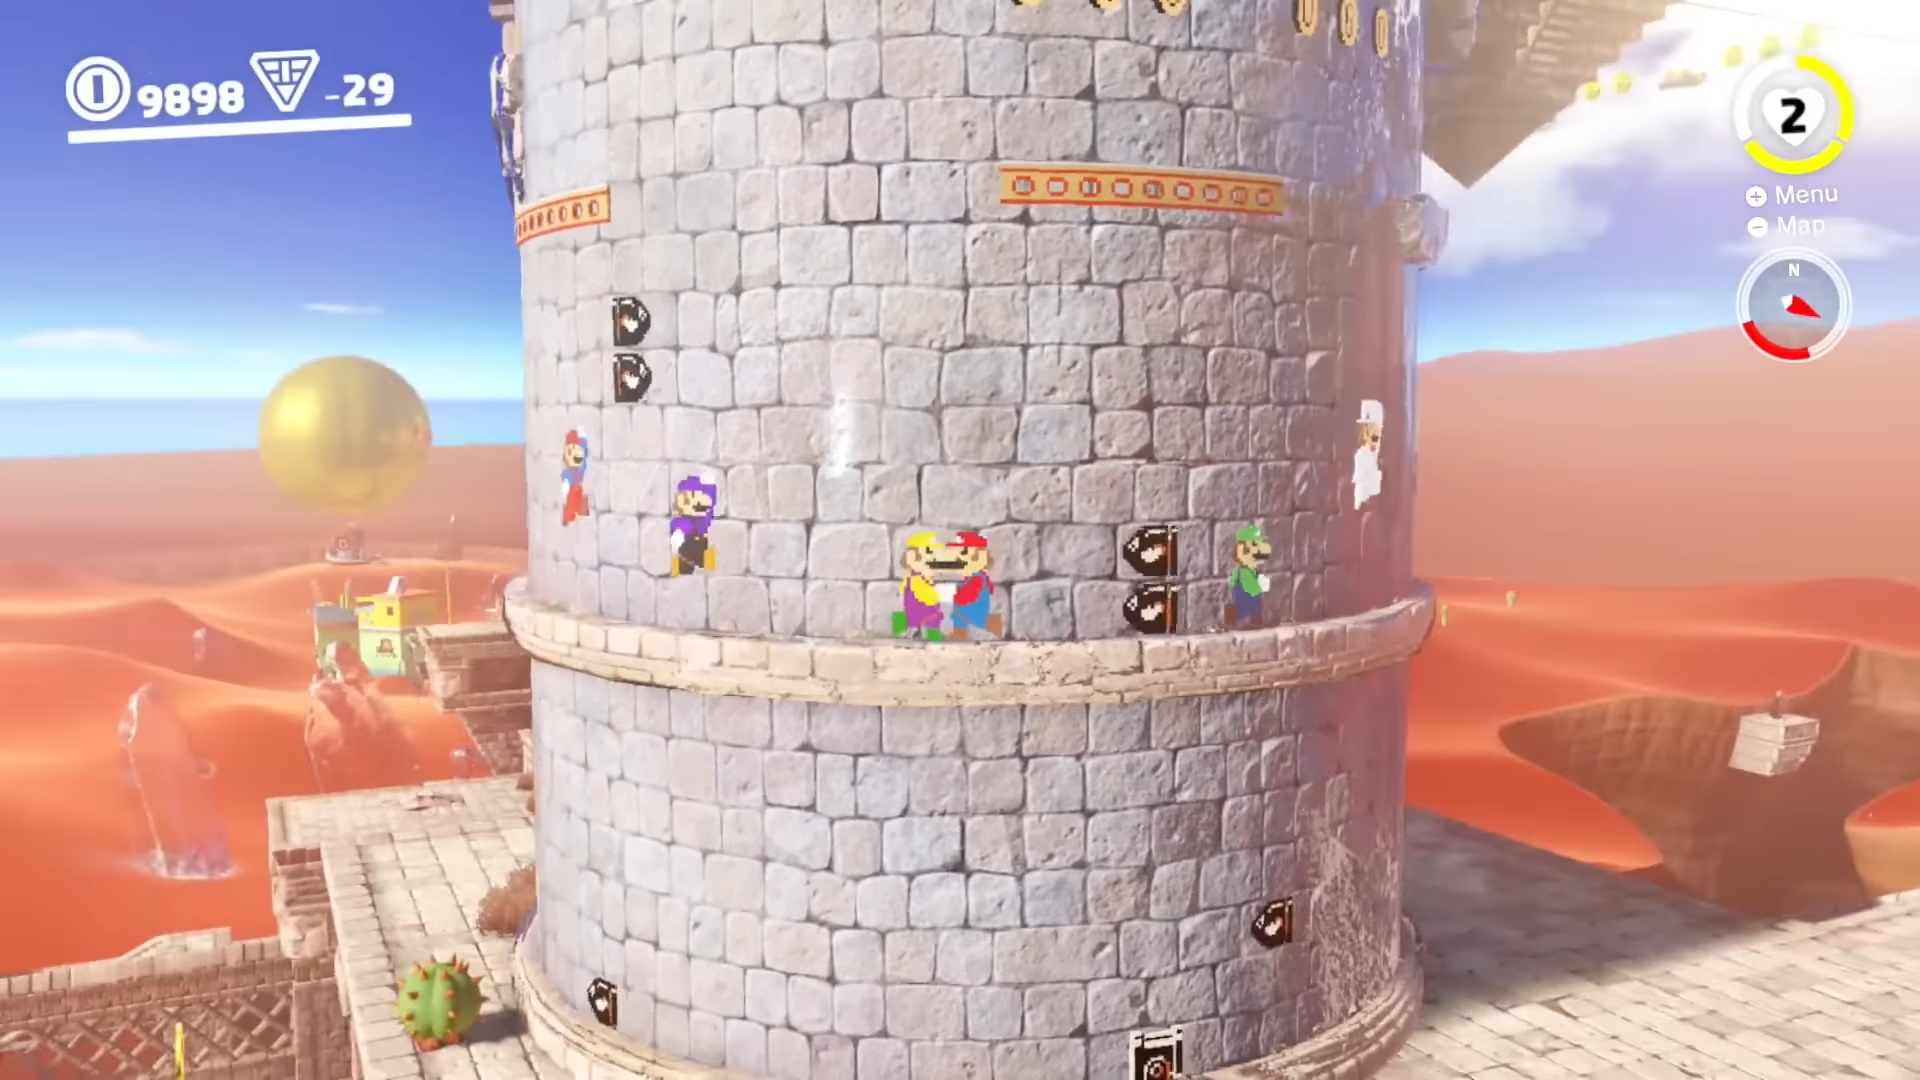 They added ONLINE MULTIPLAYER to Super Mario Odyssey 